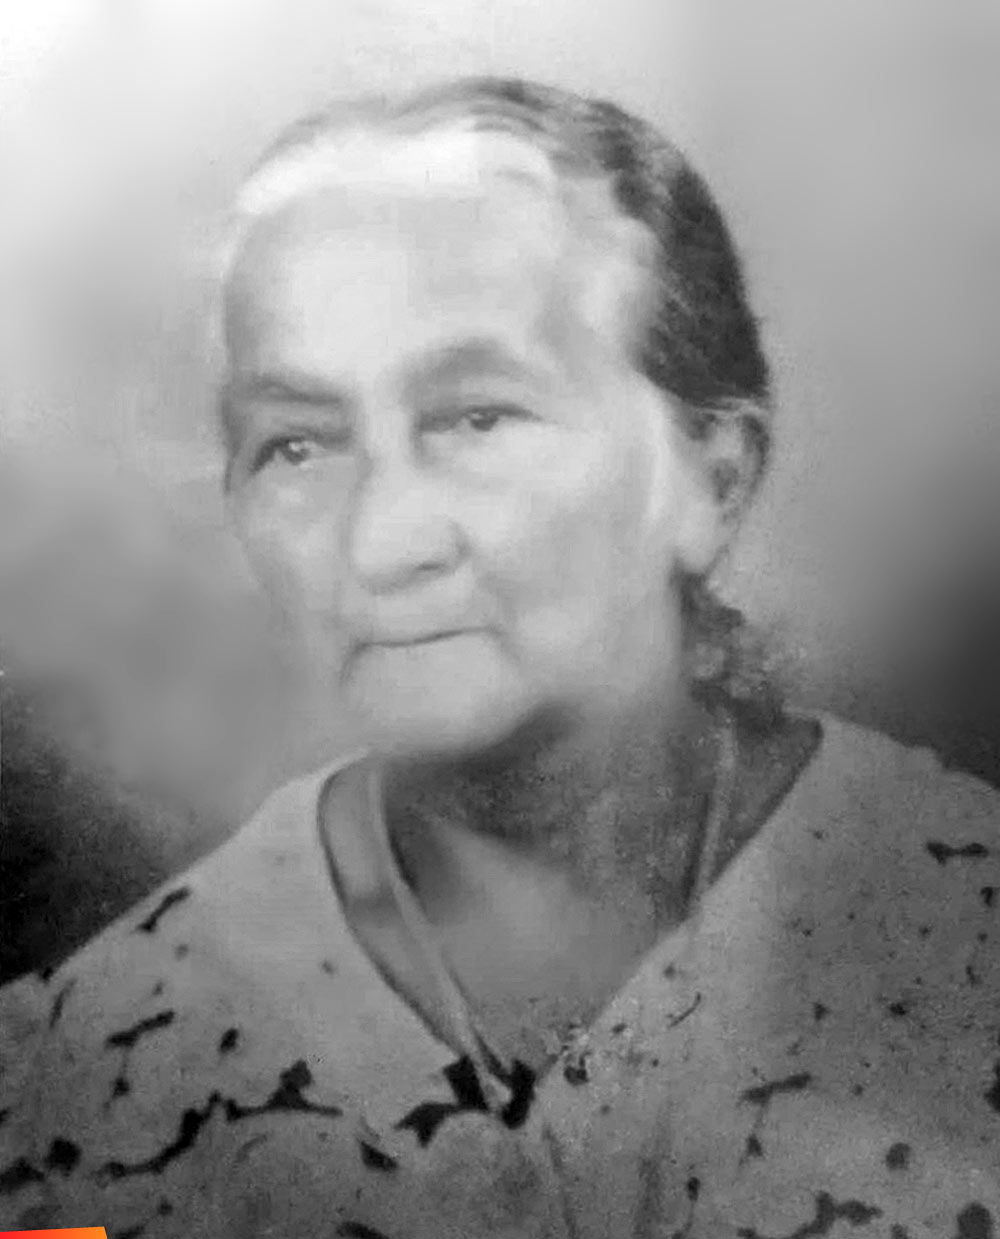 Family matriarch, Chi Chi Monica Rodriguez Young, early 1950's. Also a photo of her son, Simeon Young II as a young man